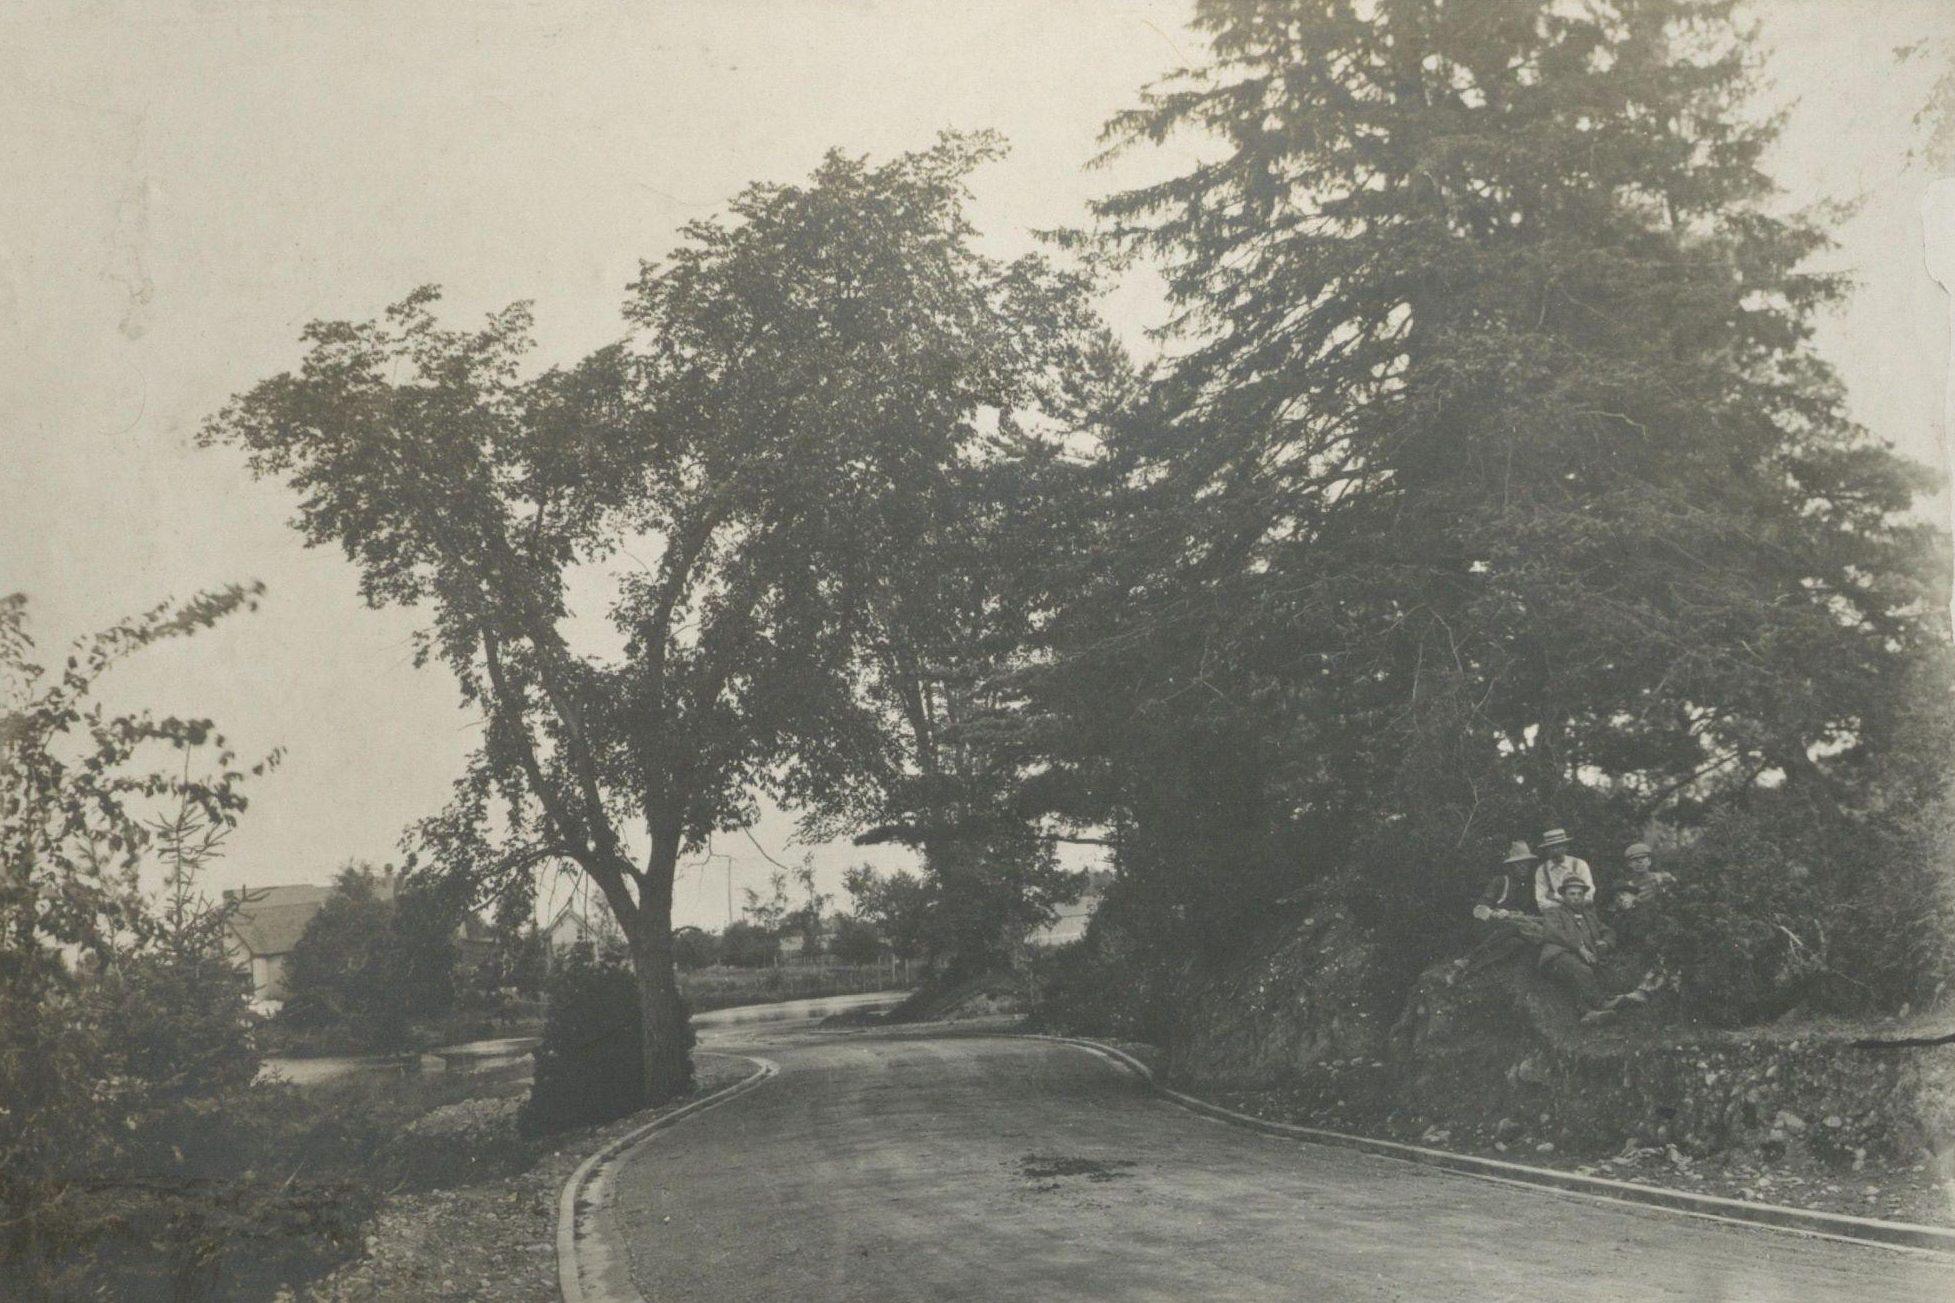 View of the Rideau Canal Driveway, winding through trees, west of Bank Street. 1902. Credit: Library and Archives Canada / E999912077